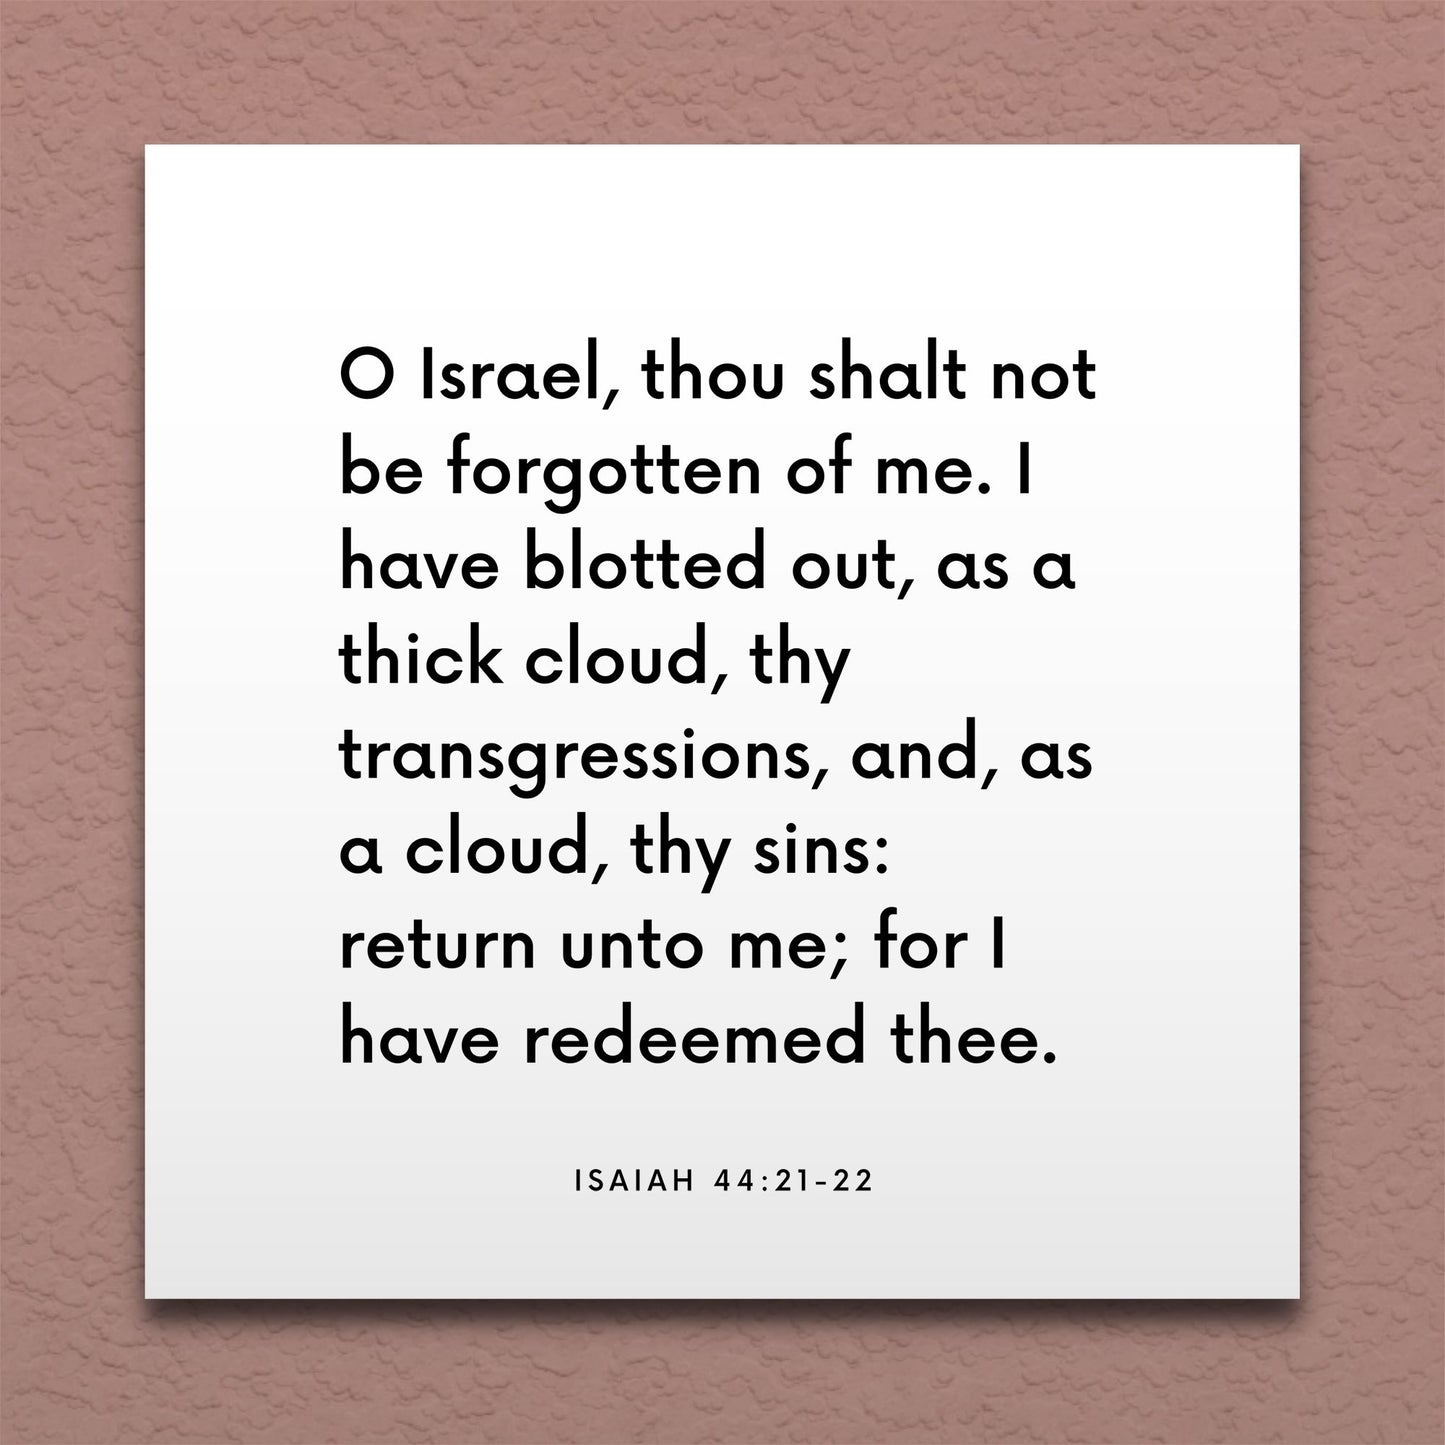 Wall-mounted scripture tile for Isaiah 44:21-22 - "Return unto me, for I have redeemed thee"